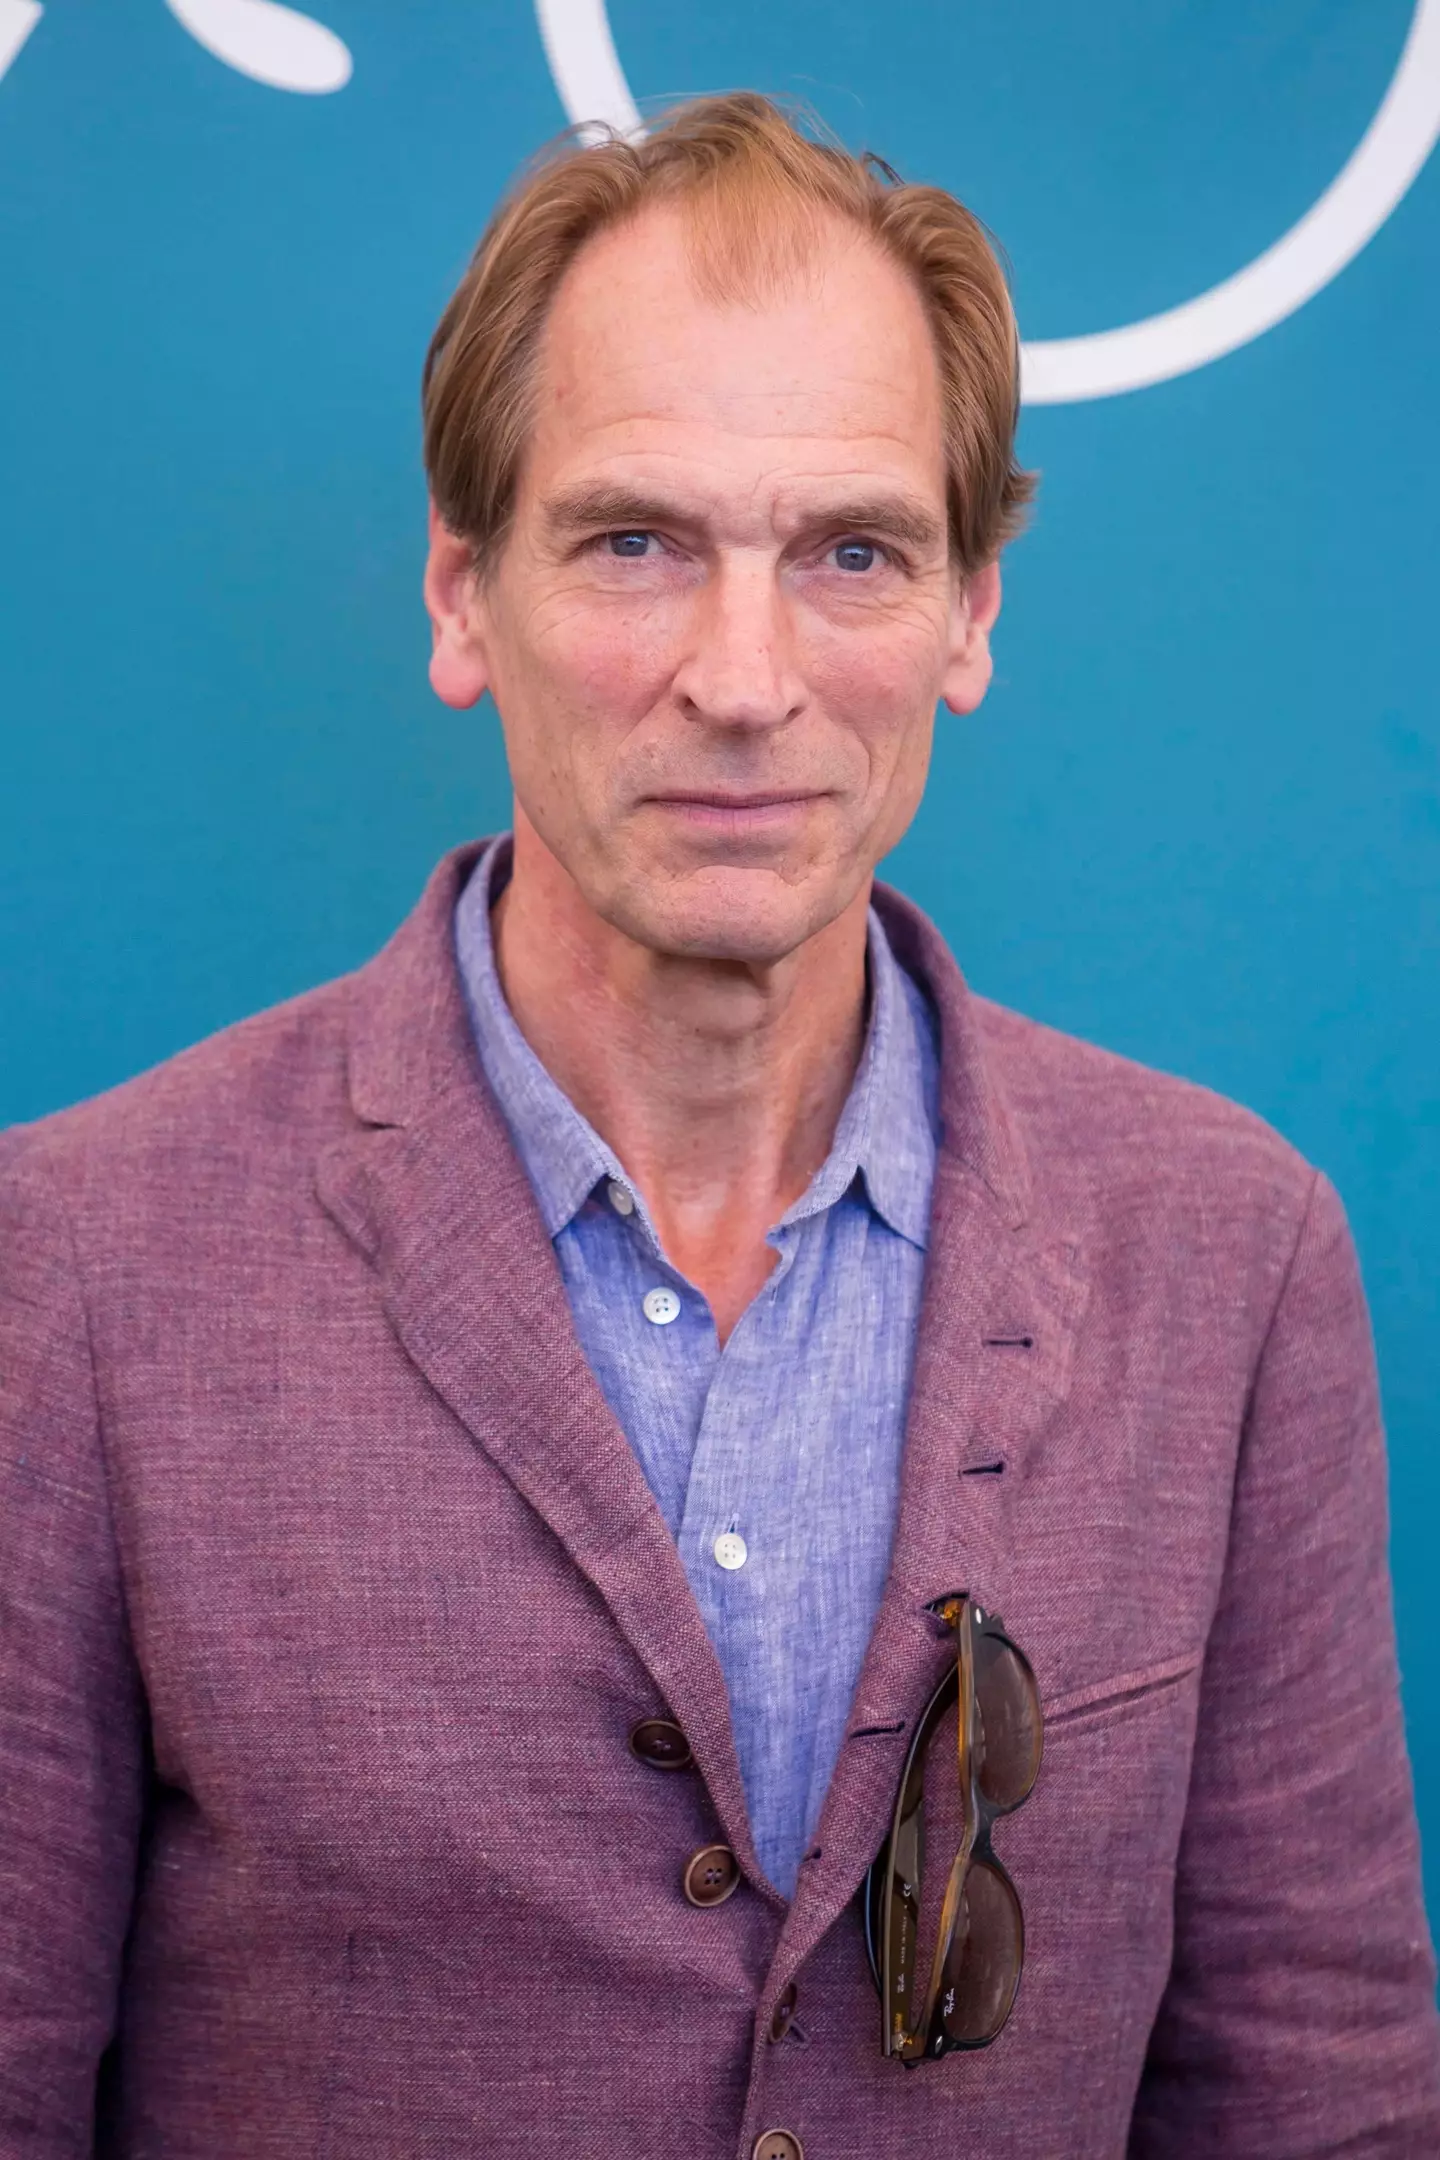 Julian Sands was reported missing by his family last week.